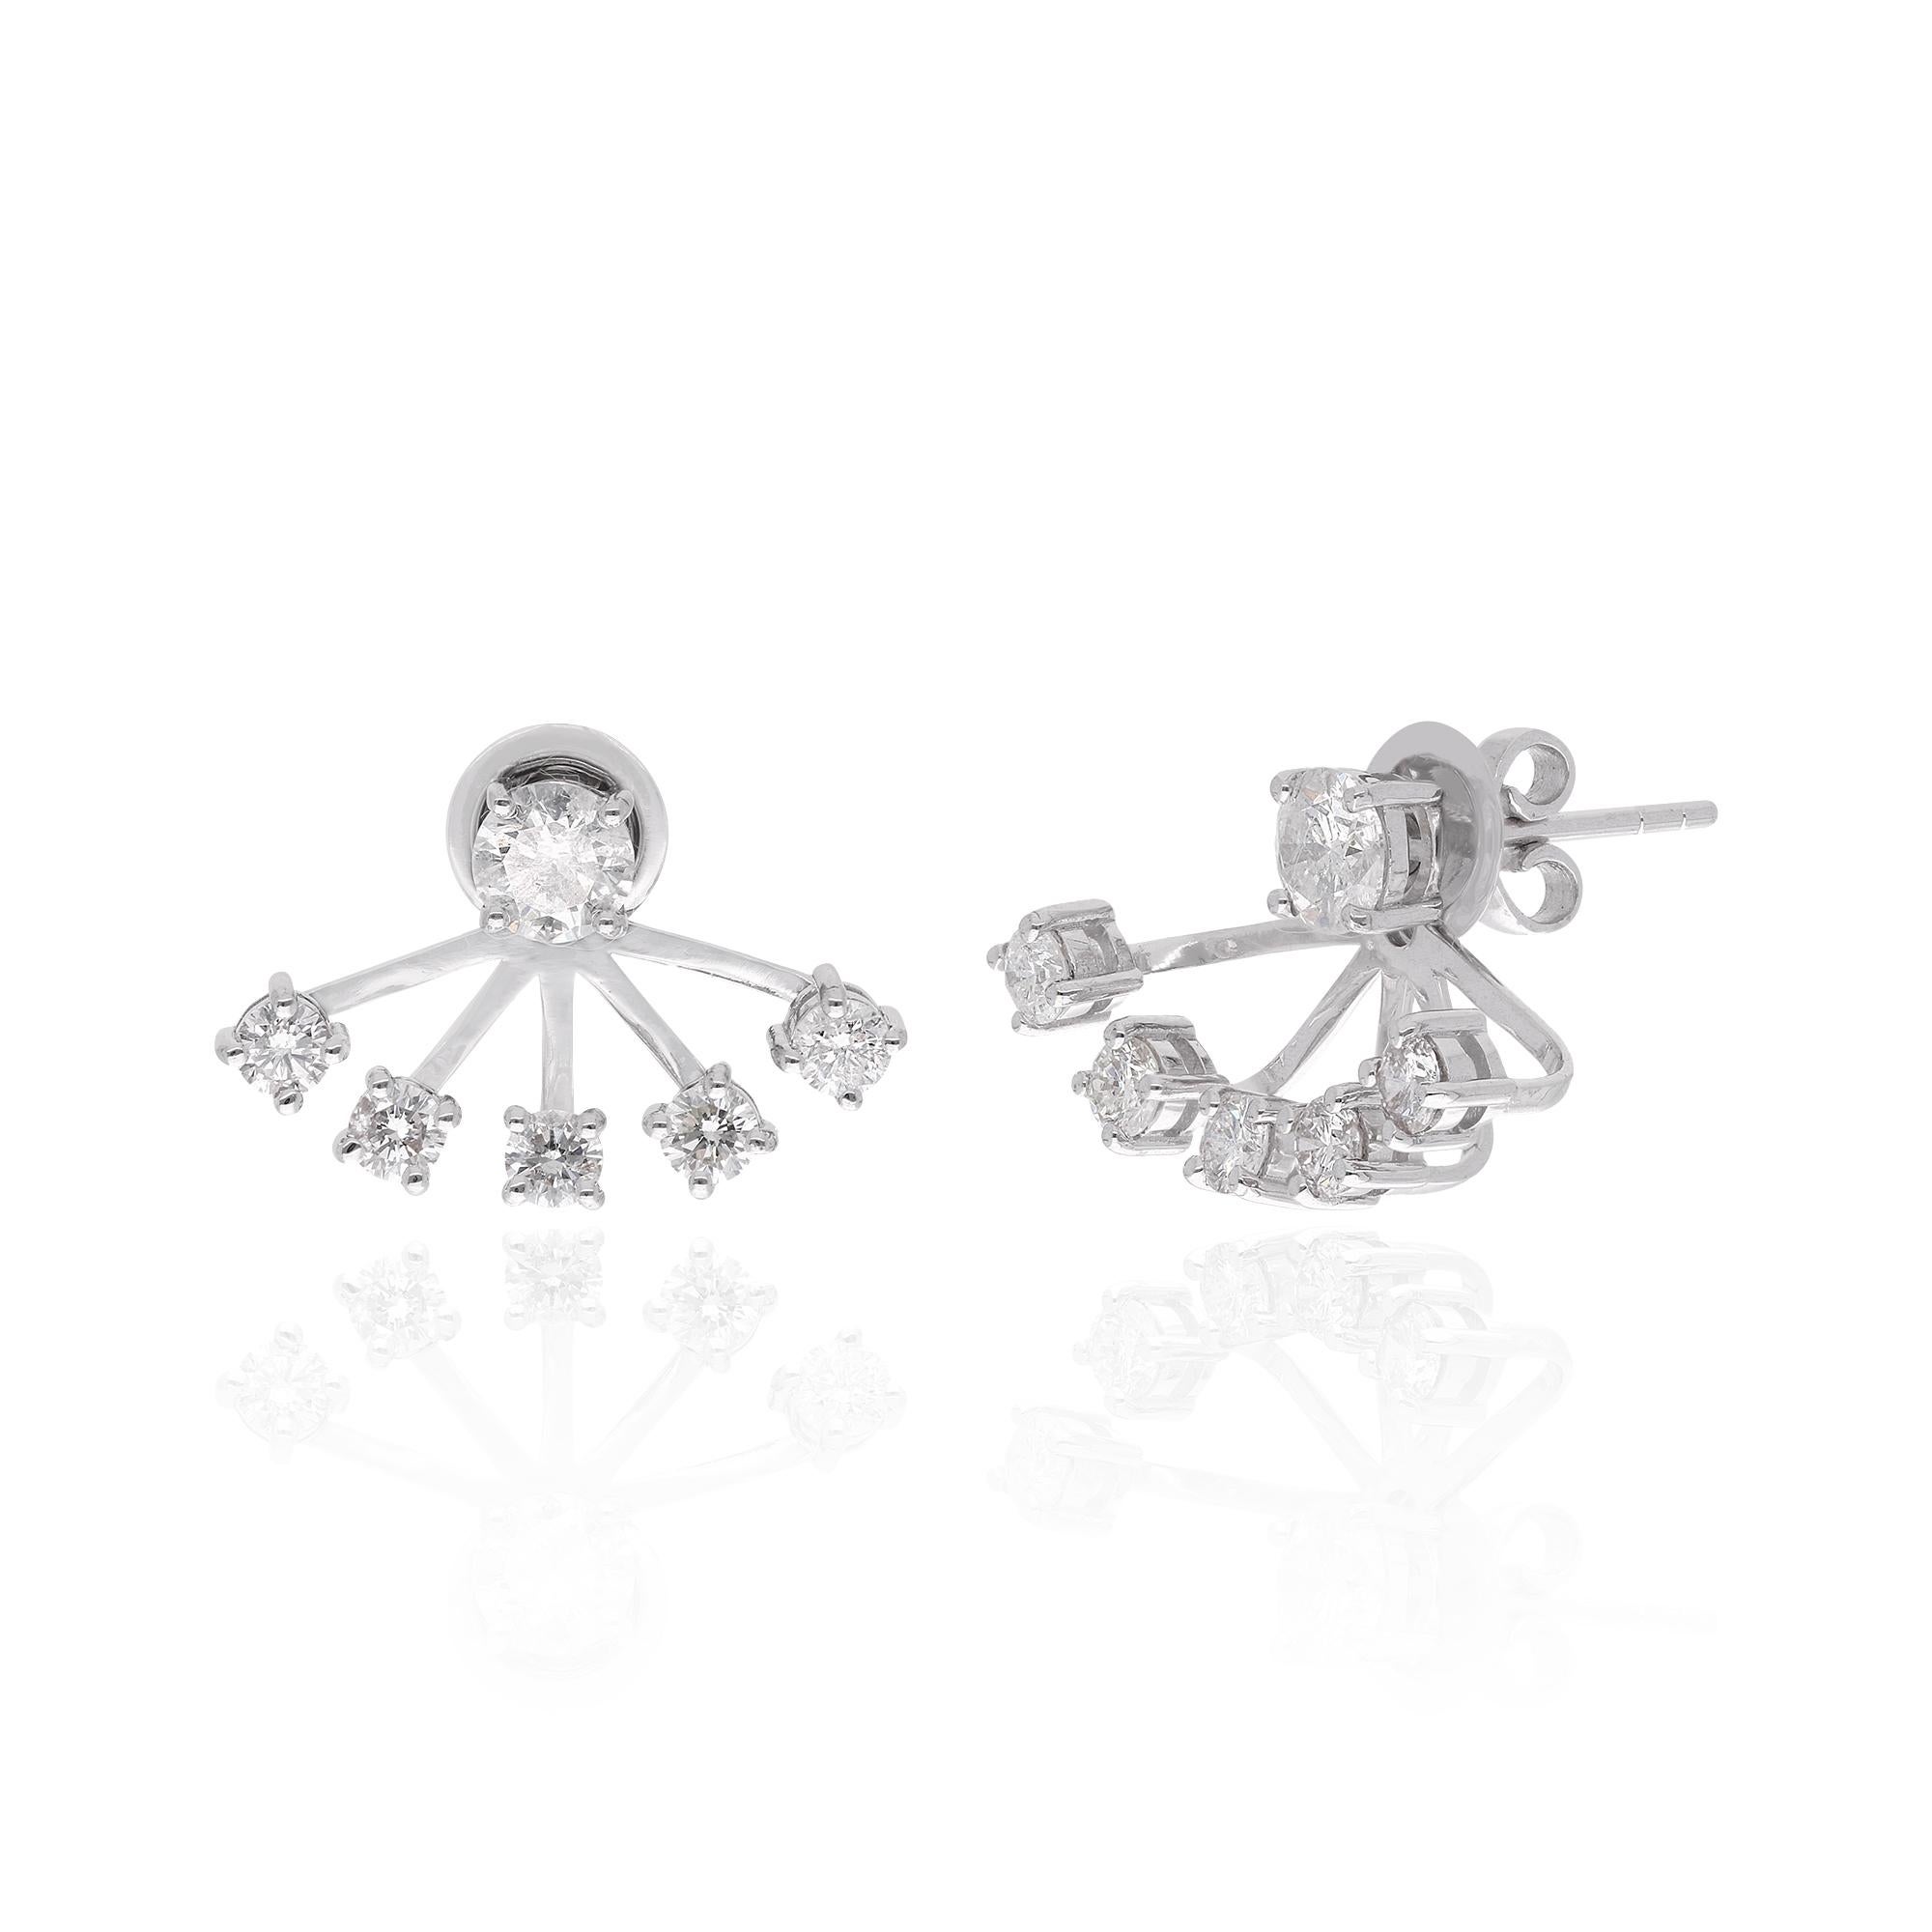 It appears you're describing a pair of jacket earrings made from 18 karat white gold, featuring natural diamonds with a total weight of 2.28 carats. These earrings are also characterized as handmade jewelry, which suggests a high level of